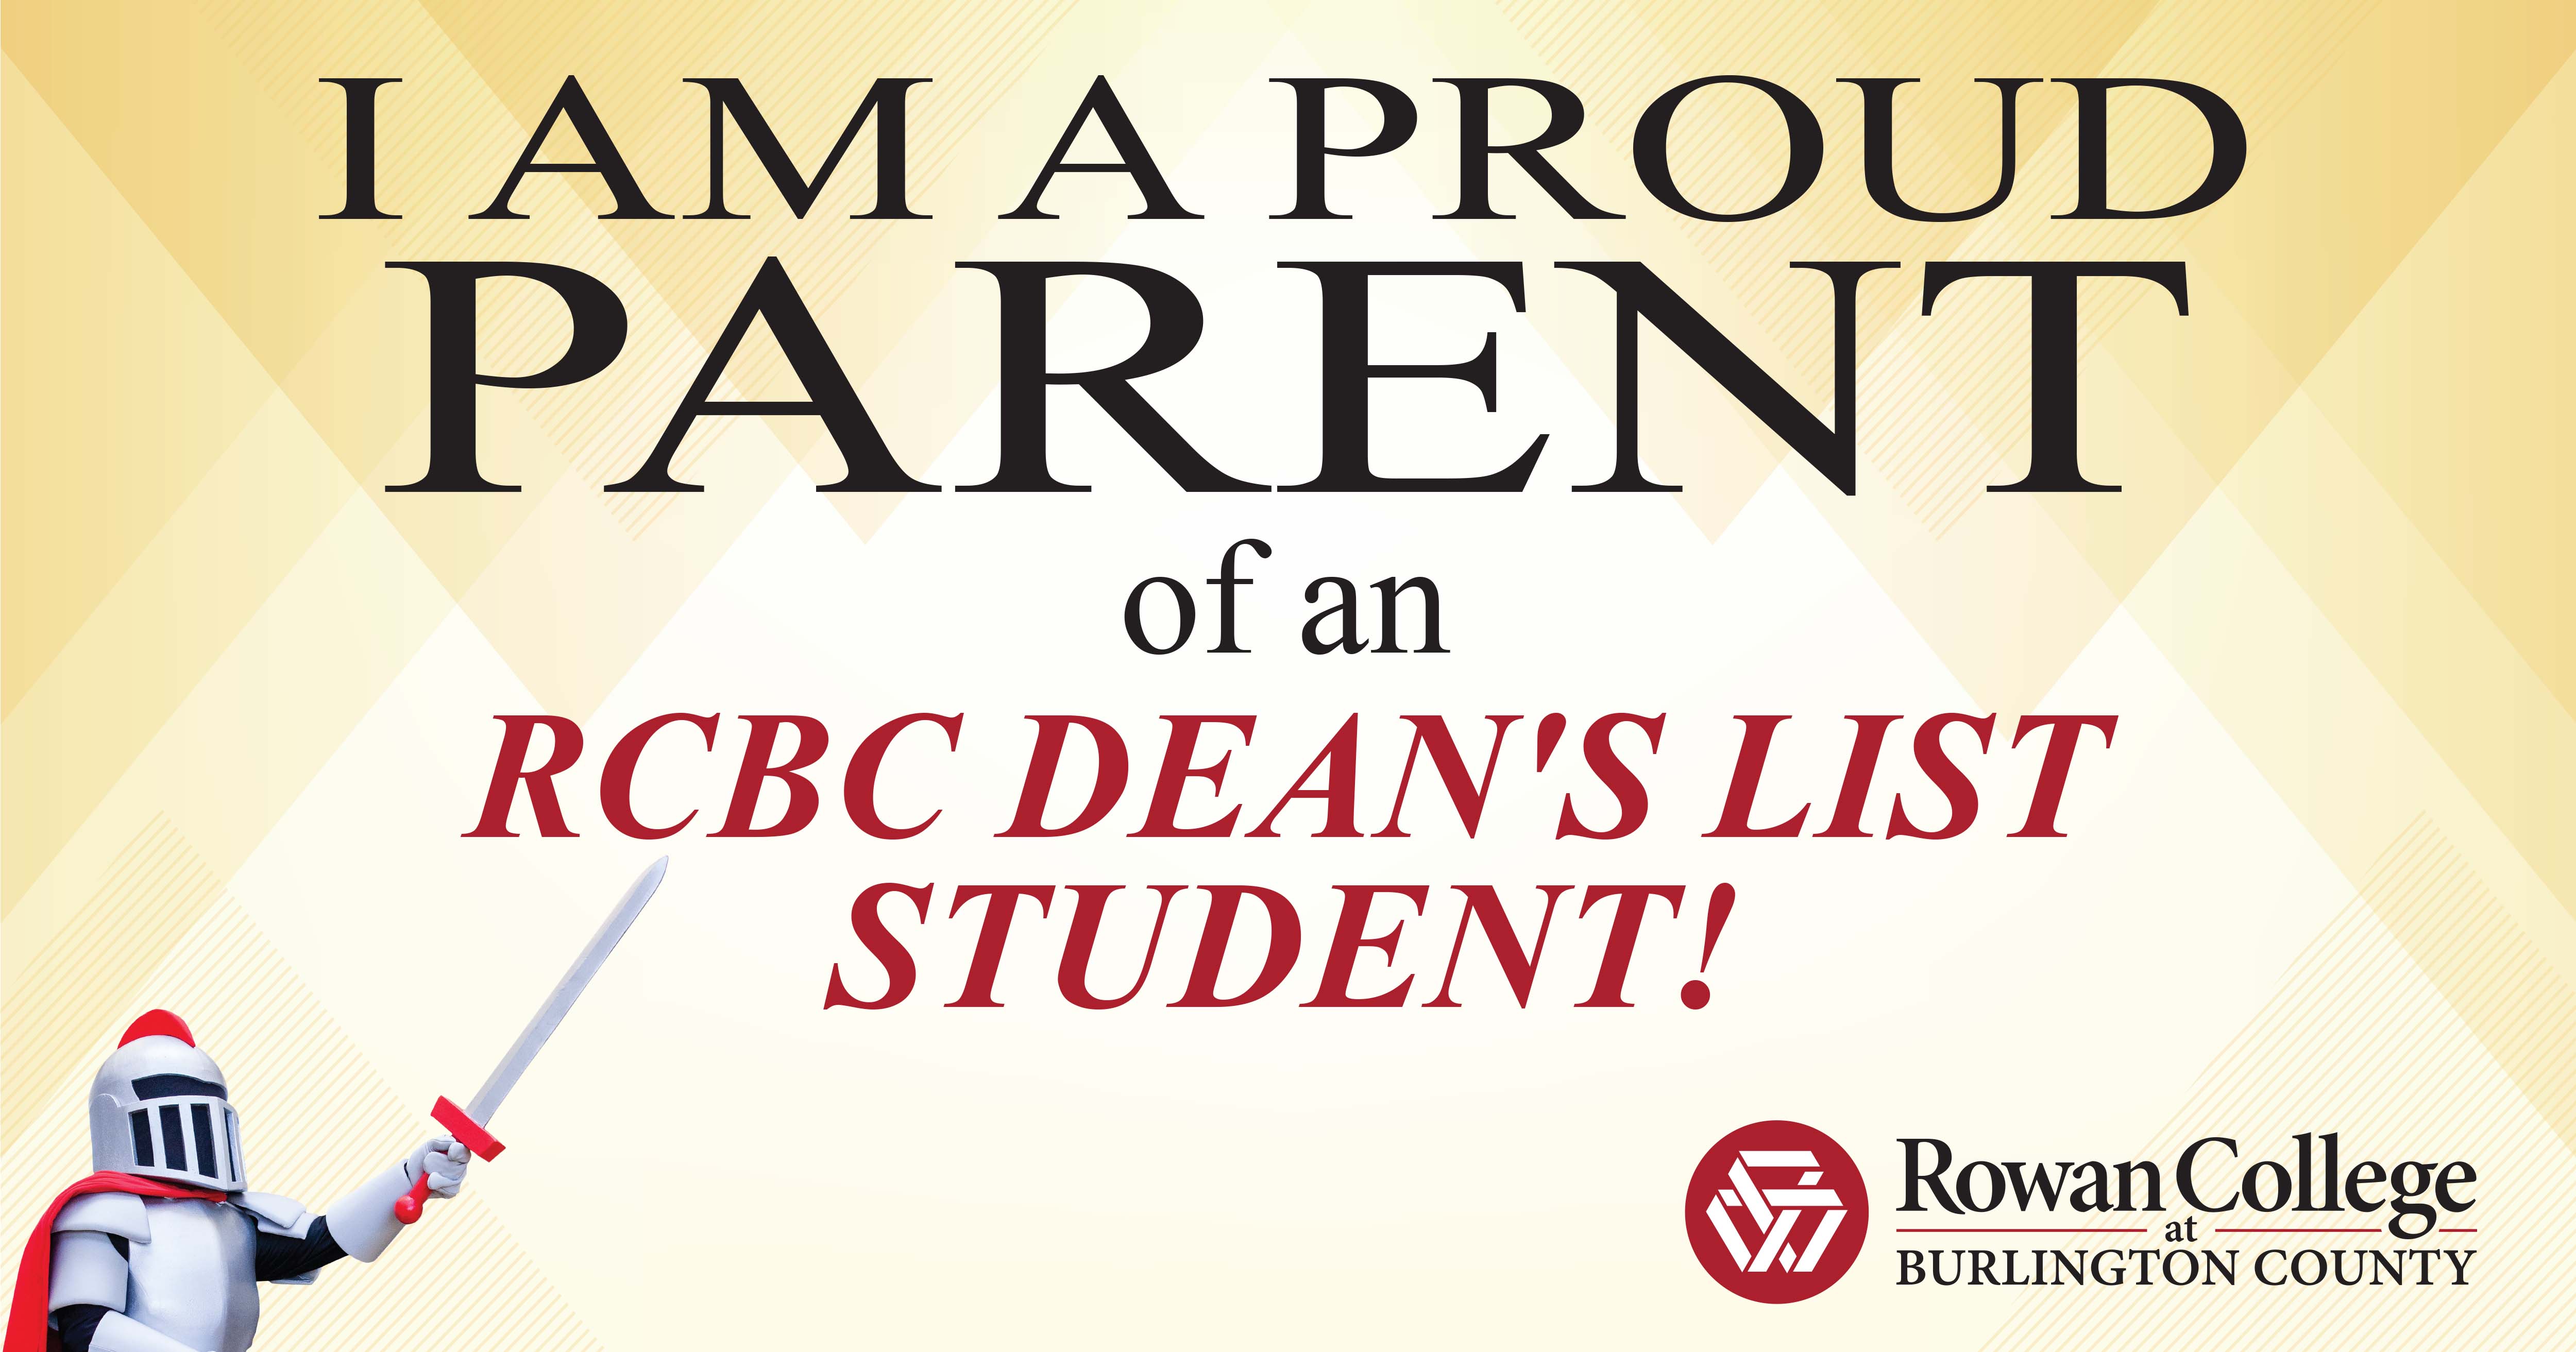 I made dean's list graphic with Barry for Facebook